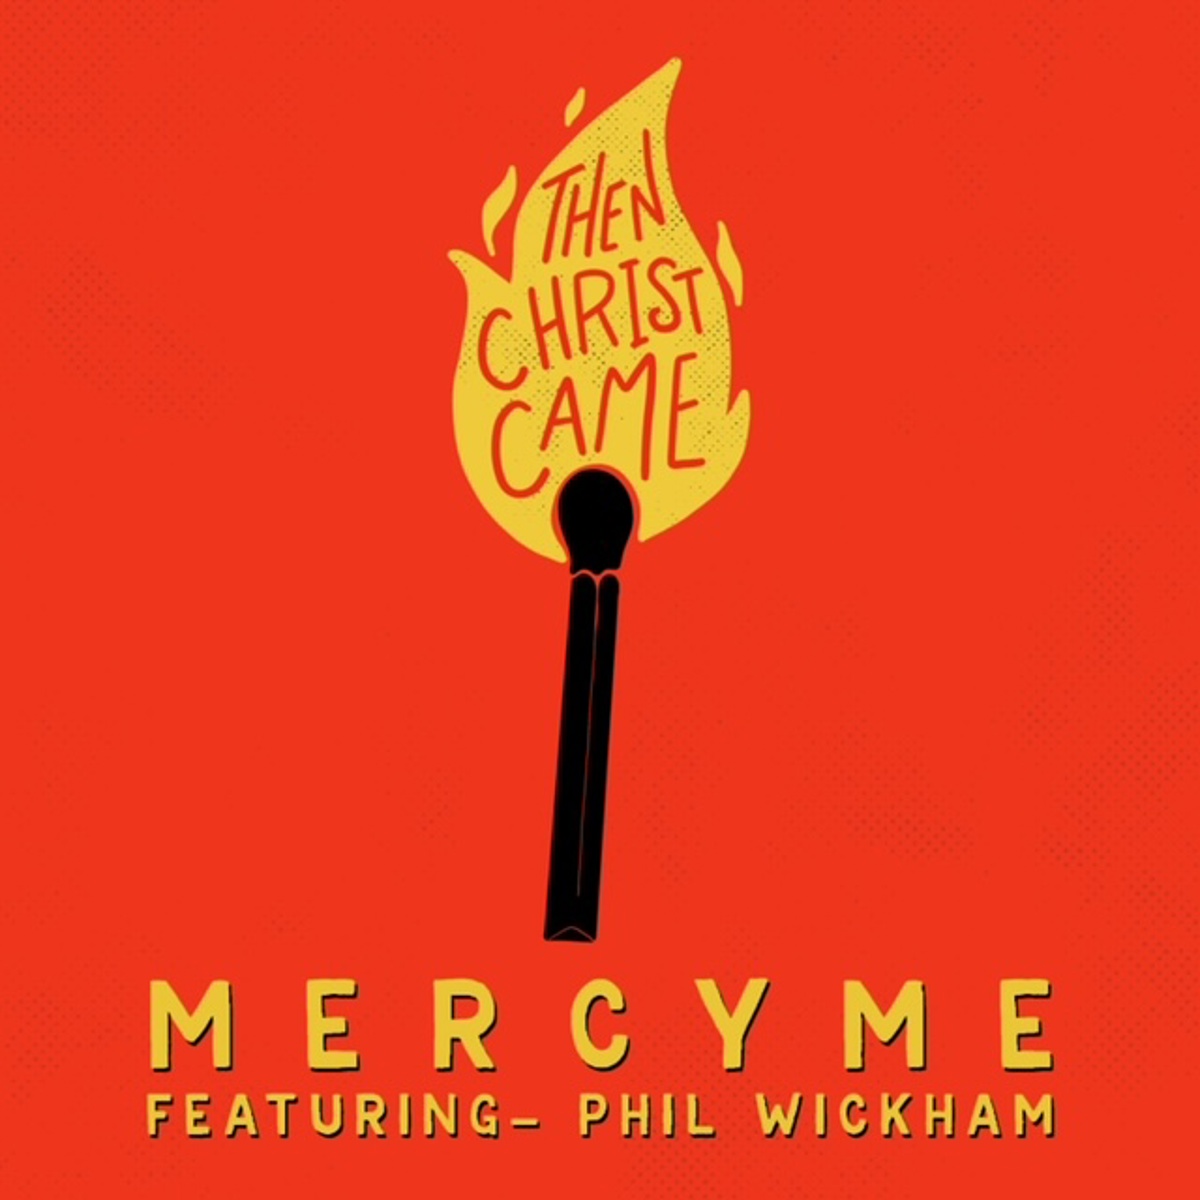 MercyMe Then Christ Came feat. Phil Wickham